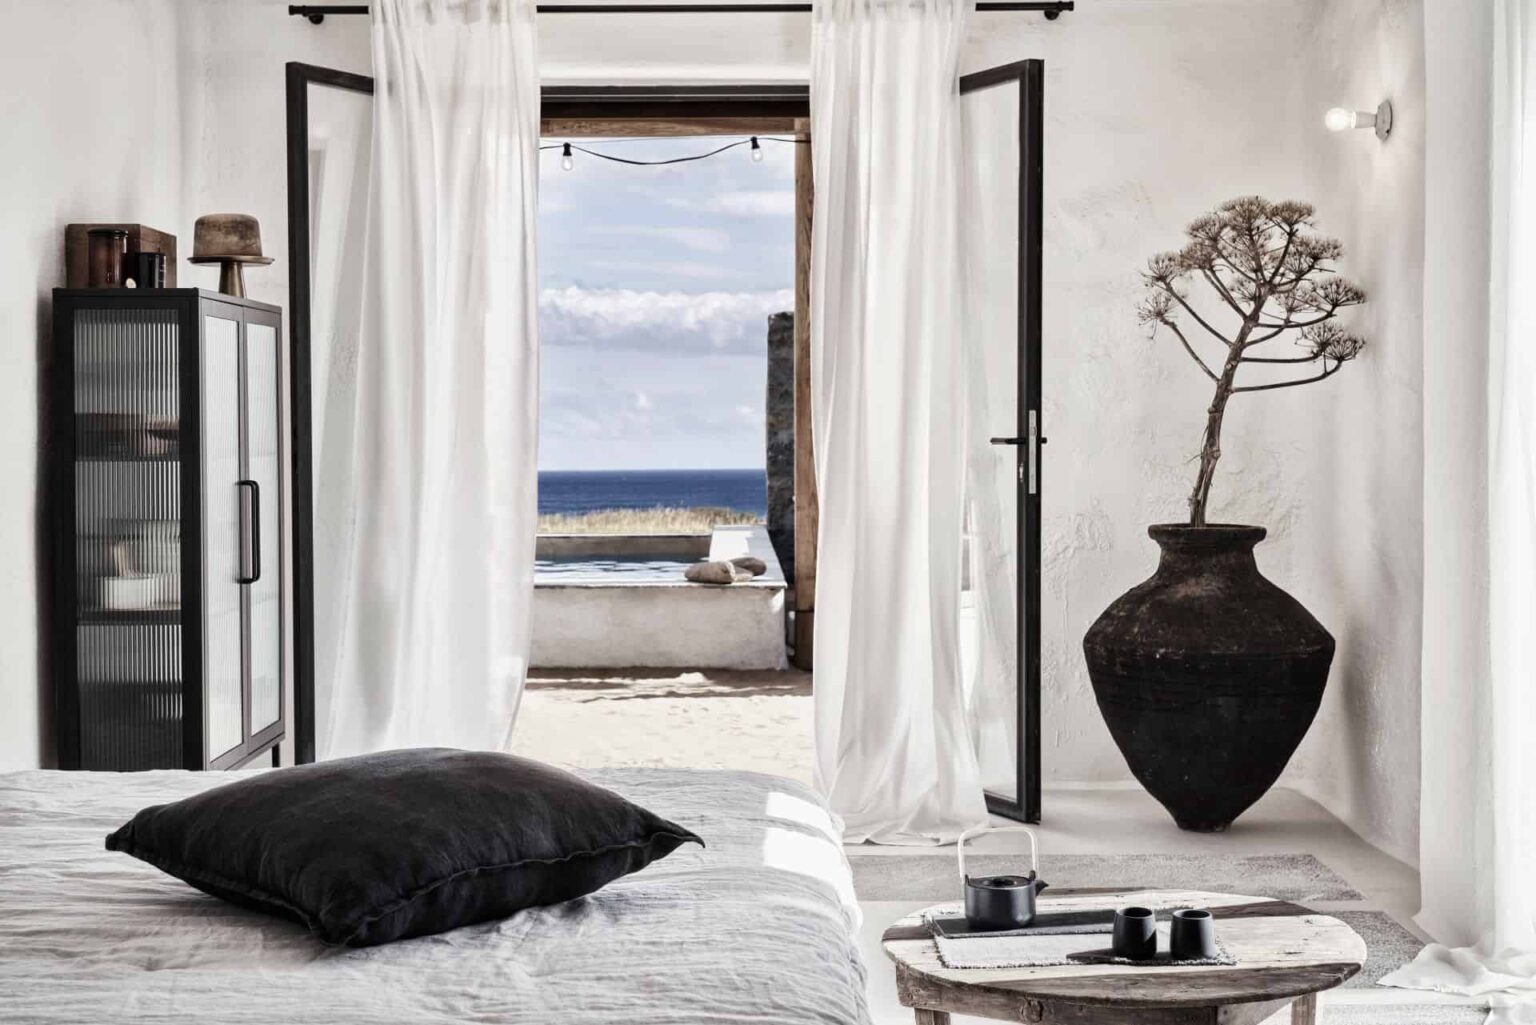 Nomad Mykonos bedroom suite with access to private pool and beautiful sea view